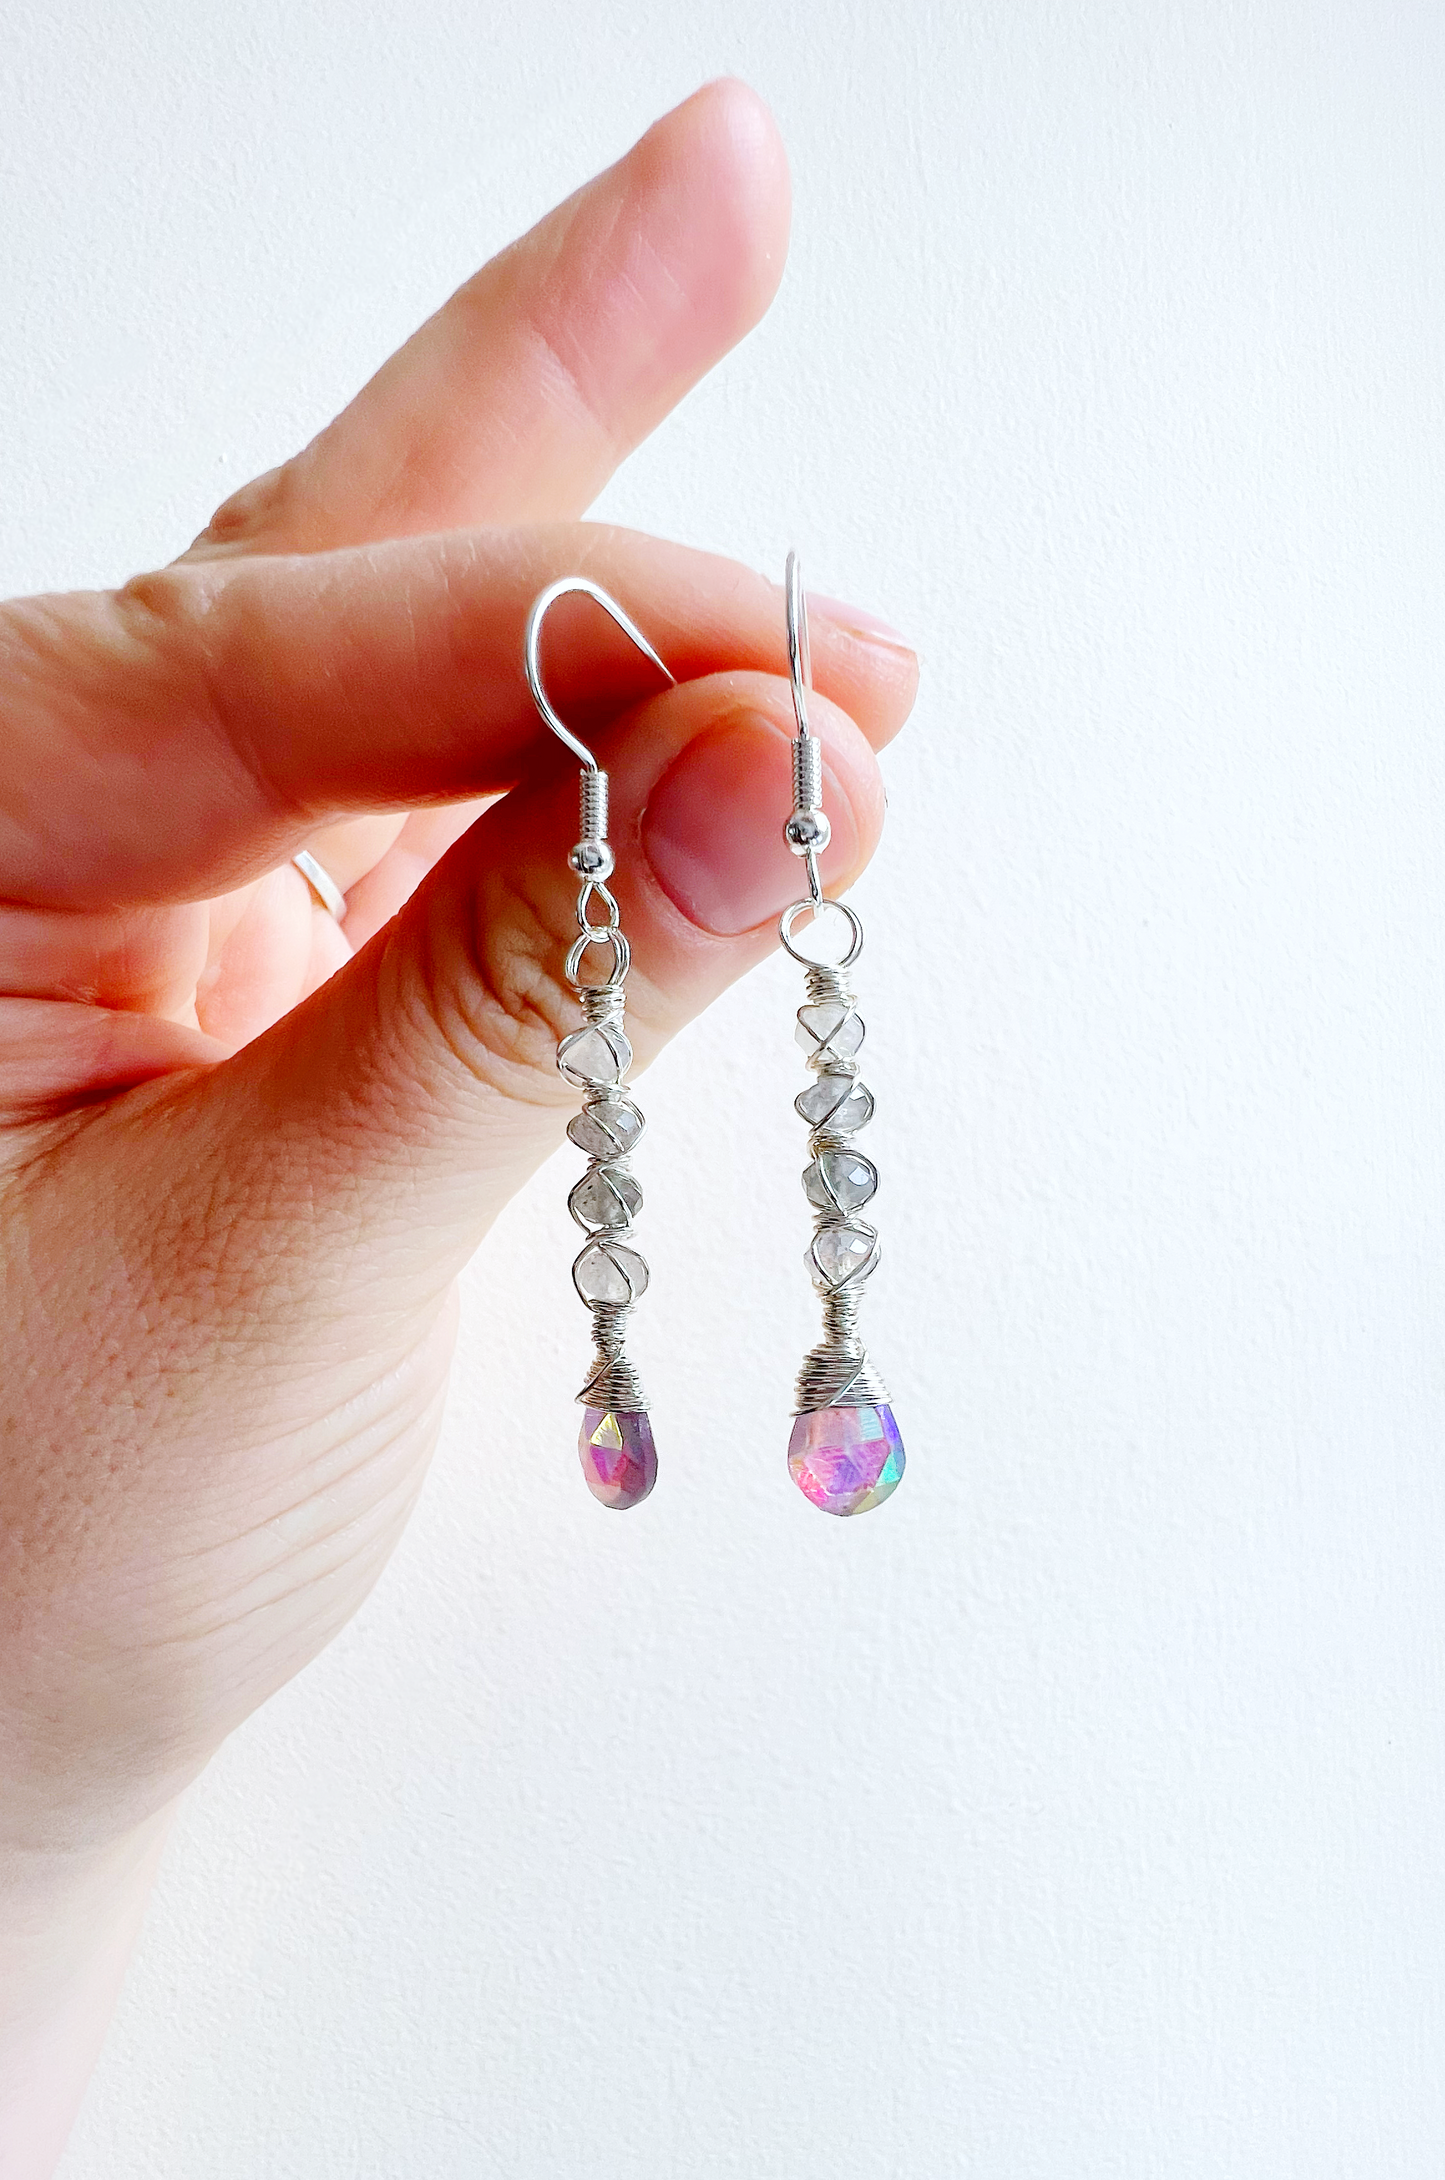 Twisted kisses earrings - Labradorite and mystic amethyst